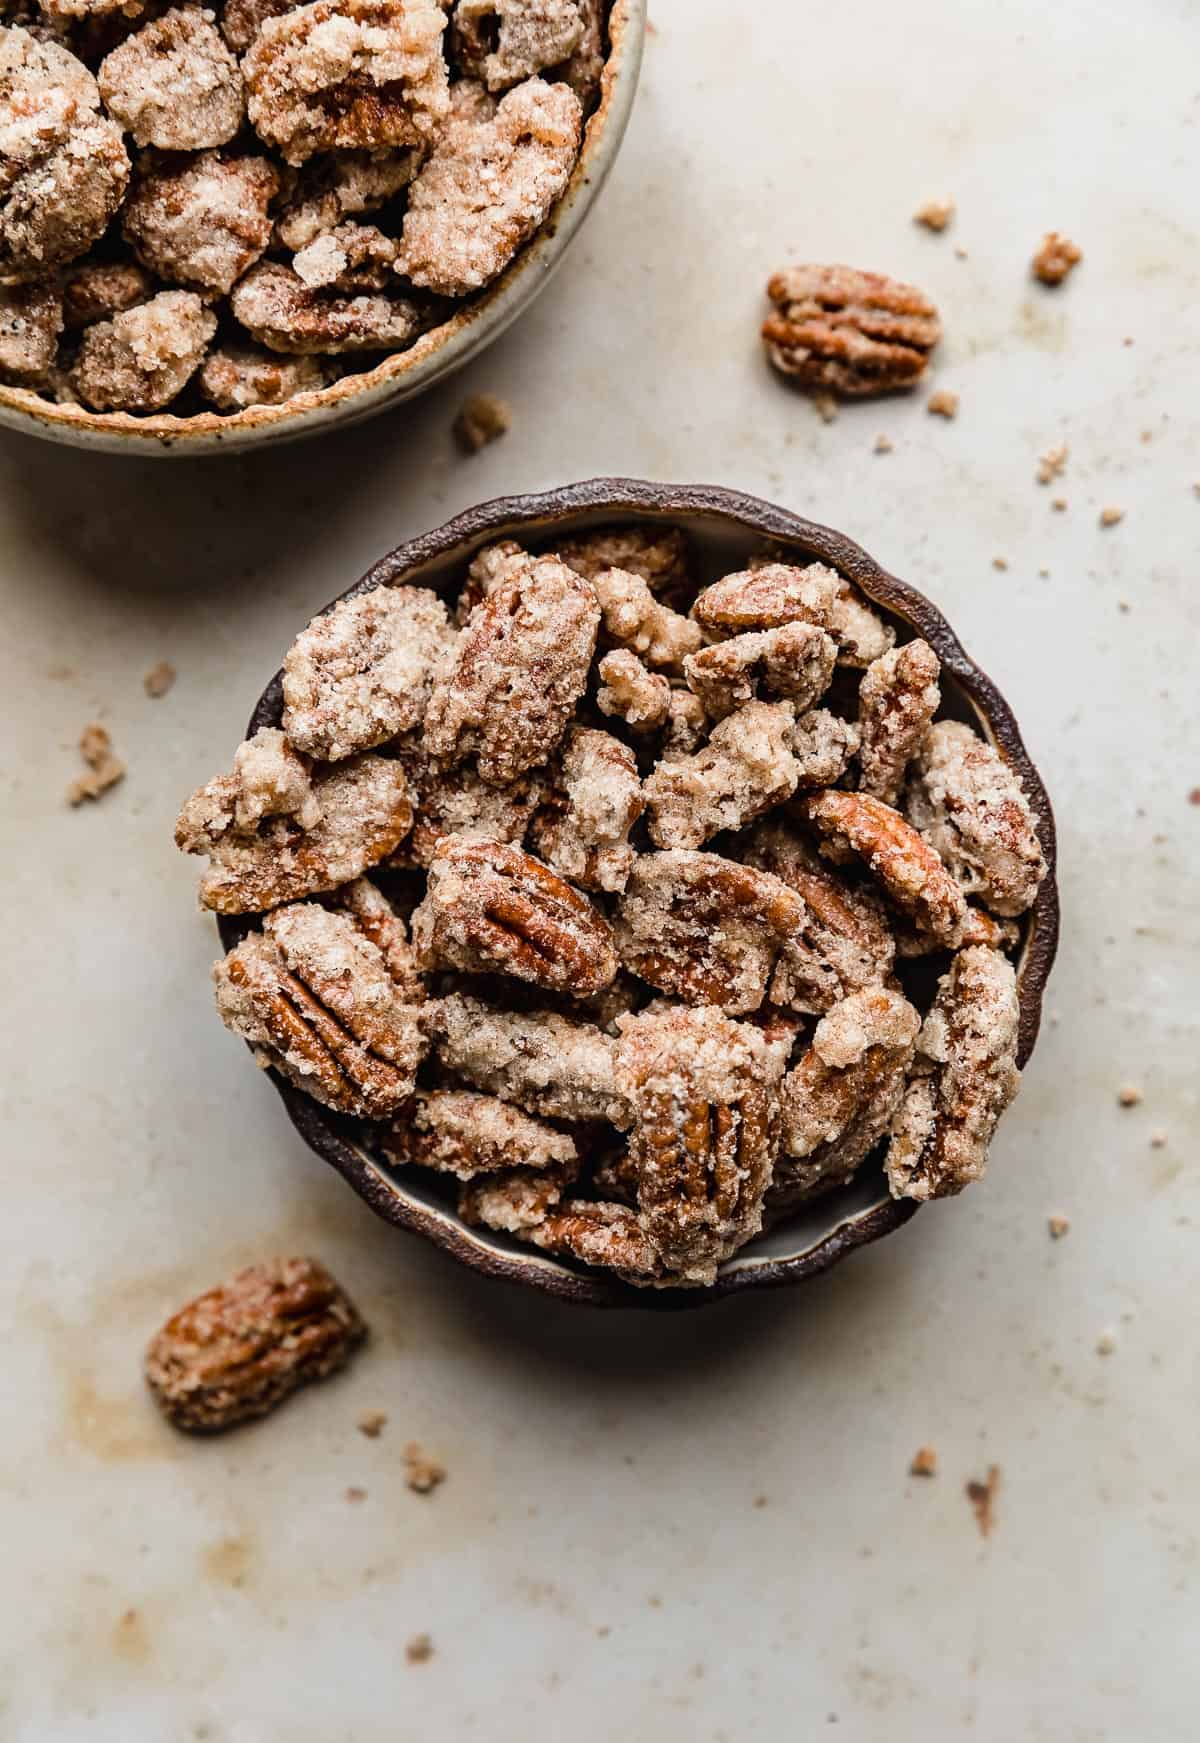 Two bowls full of sugared candied pecans.